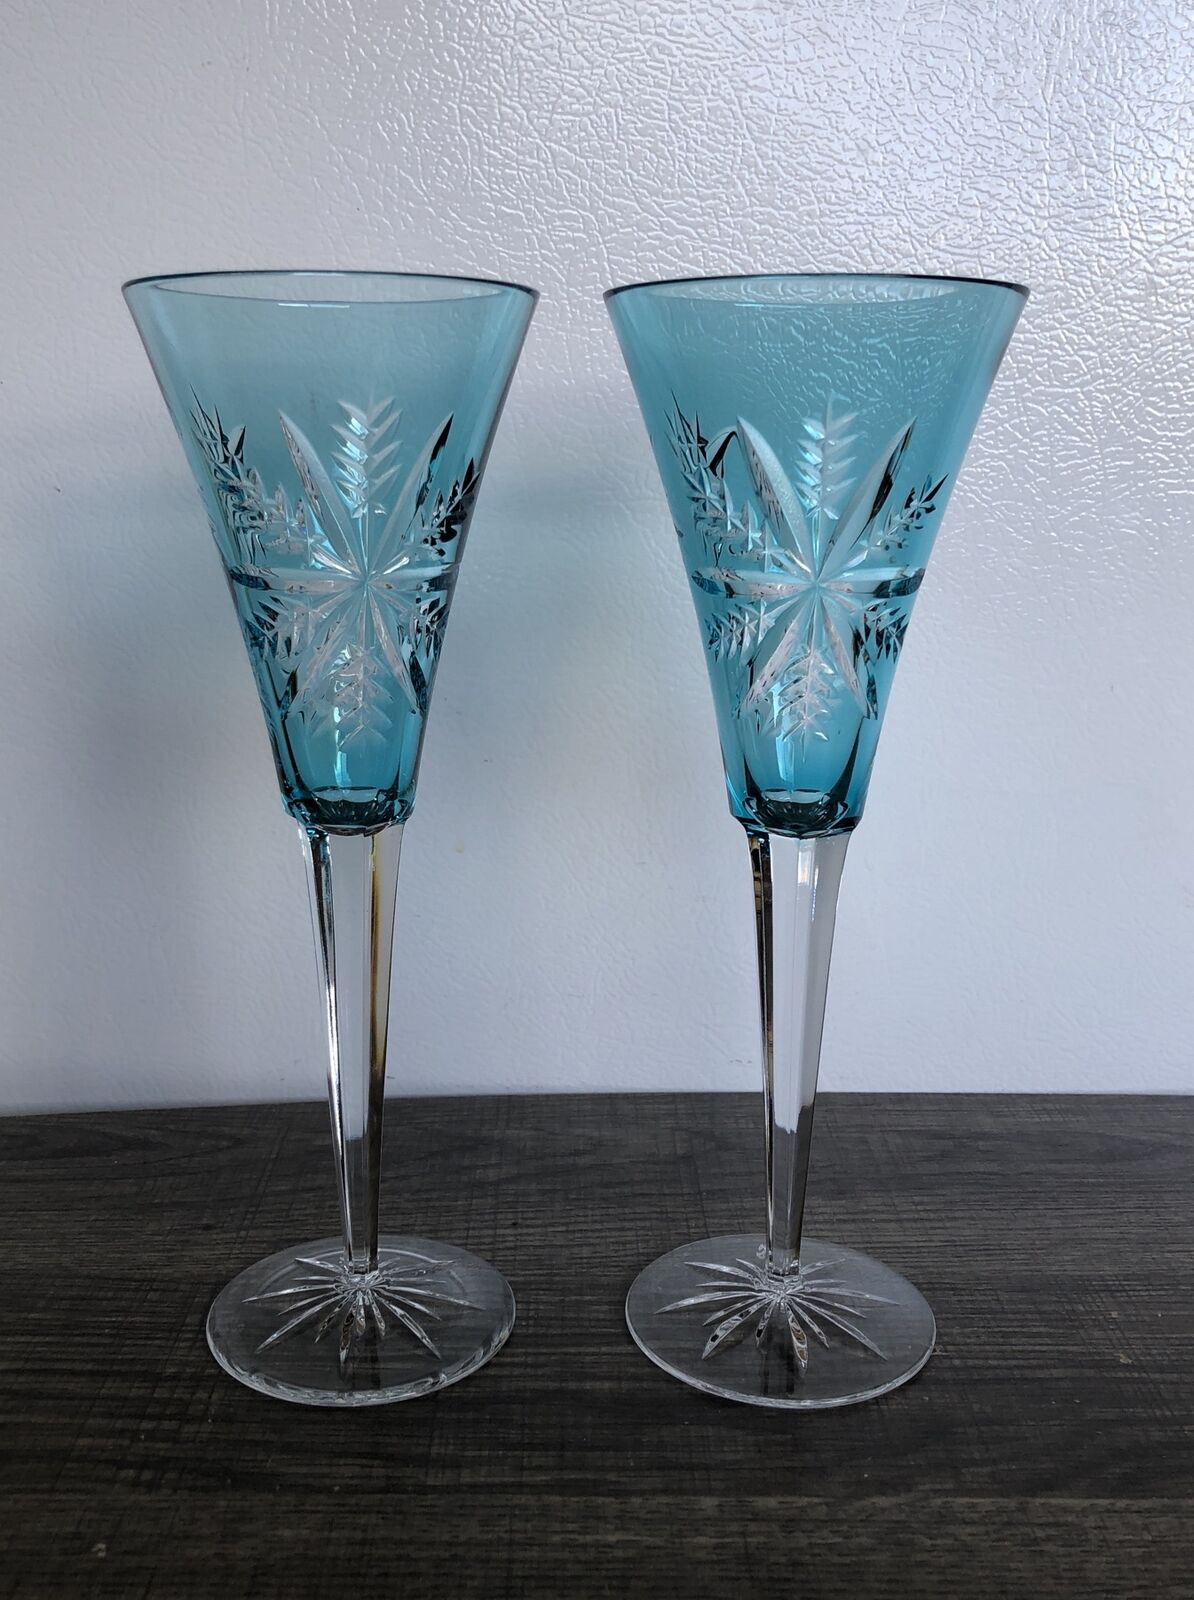 WATERFORD-2 Aqua Snow Crystals Champagne Flutes Waterford Crystal Toasting Glass